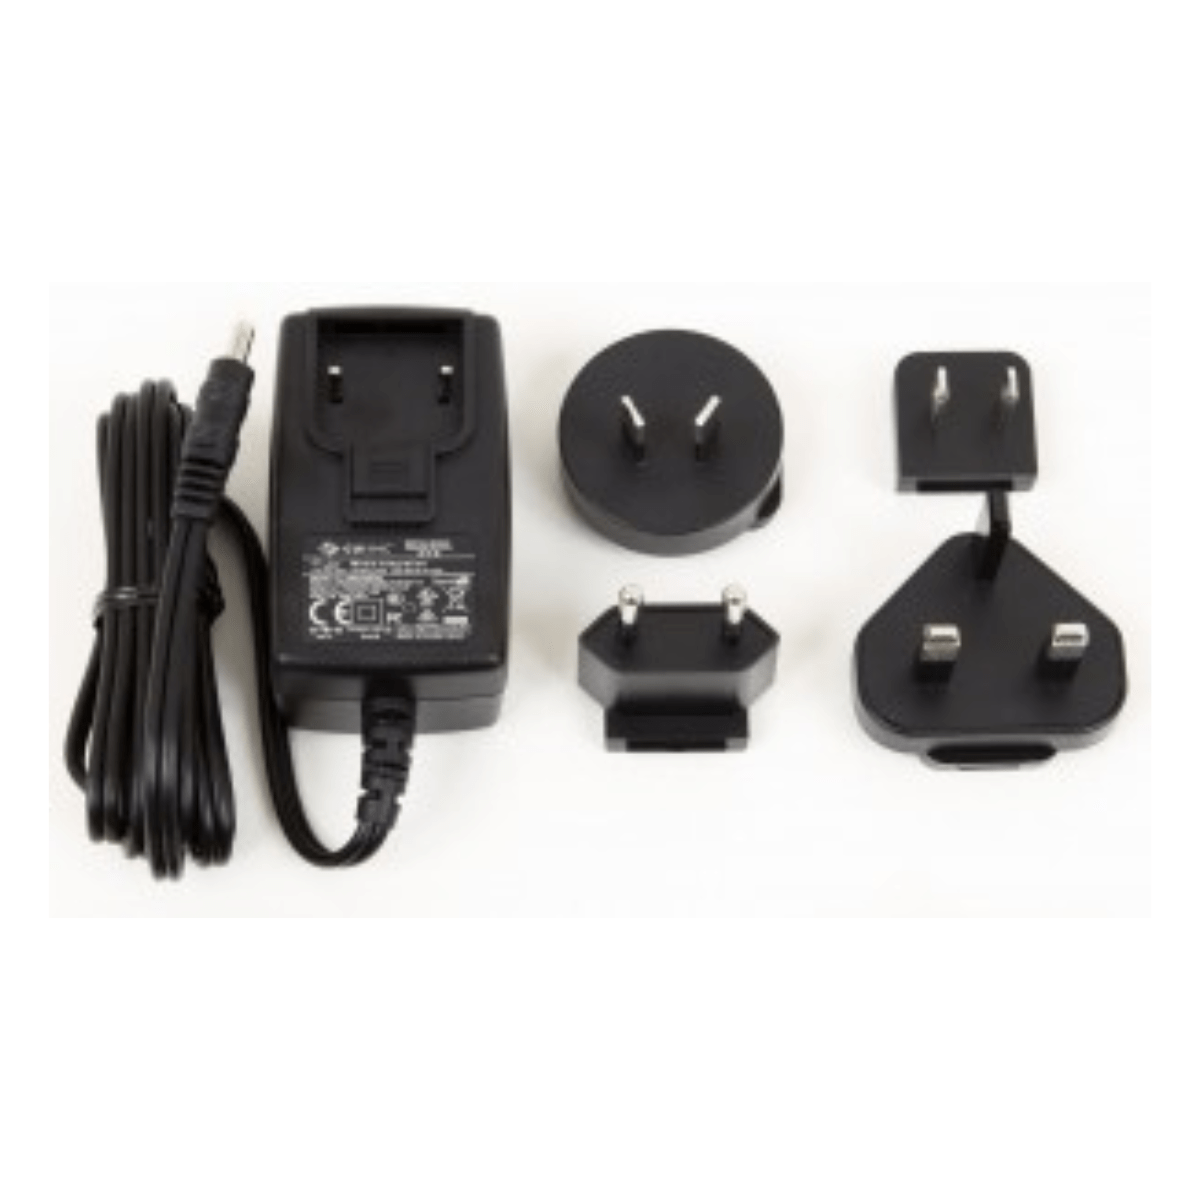 Power Supply for ONE for iPad and Mac, One for Mac, and Duet for iPad and Mac